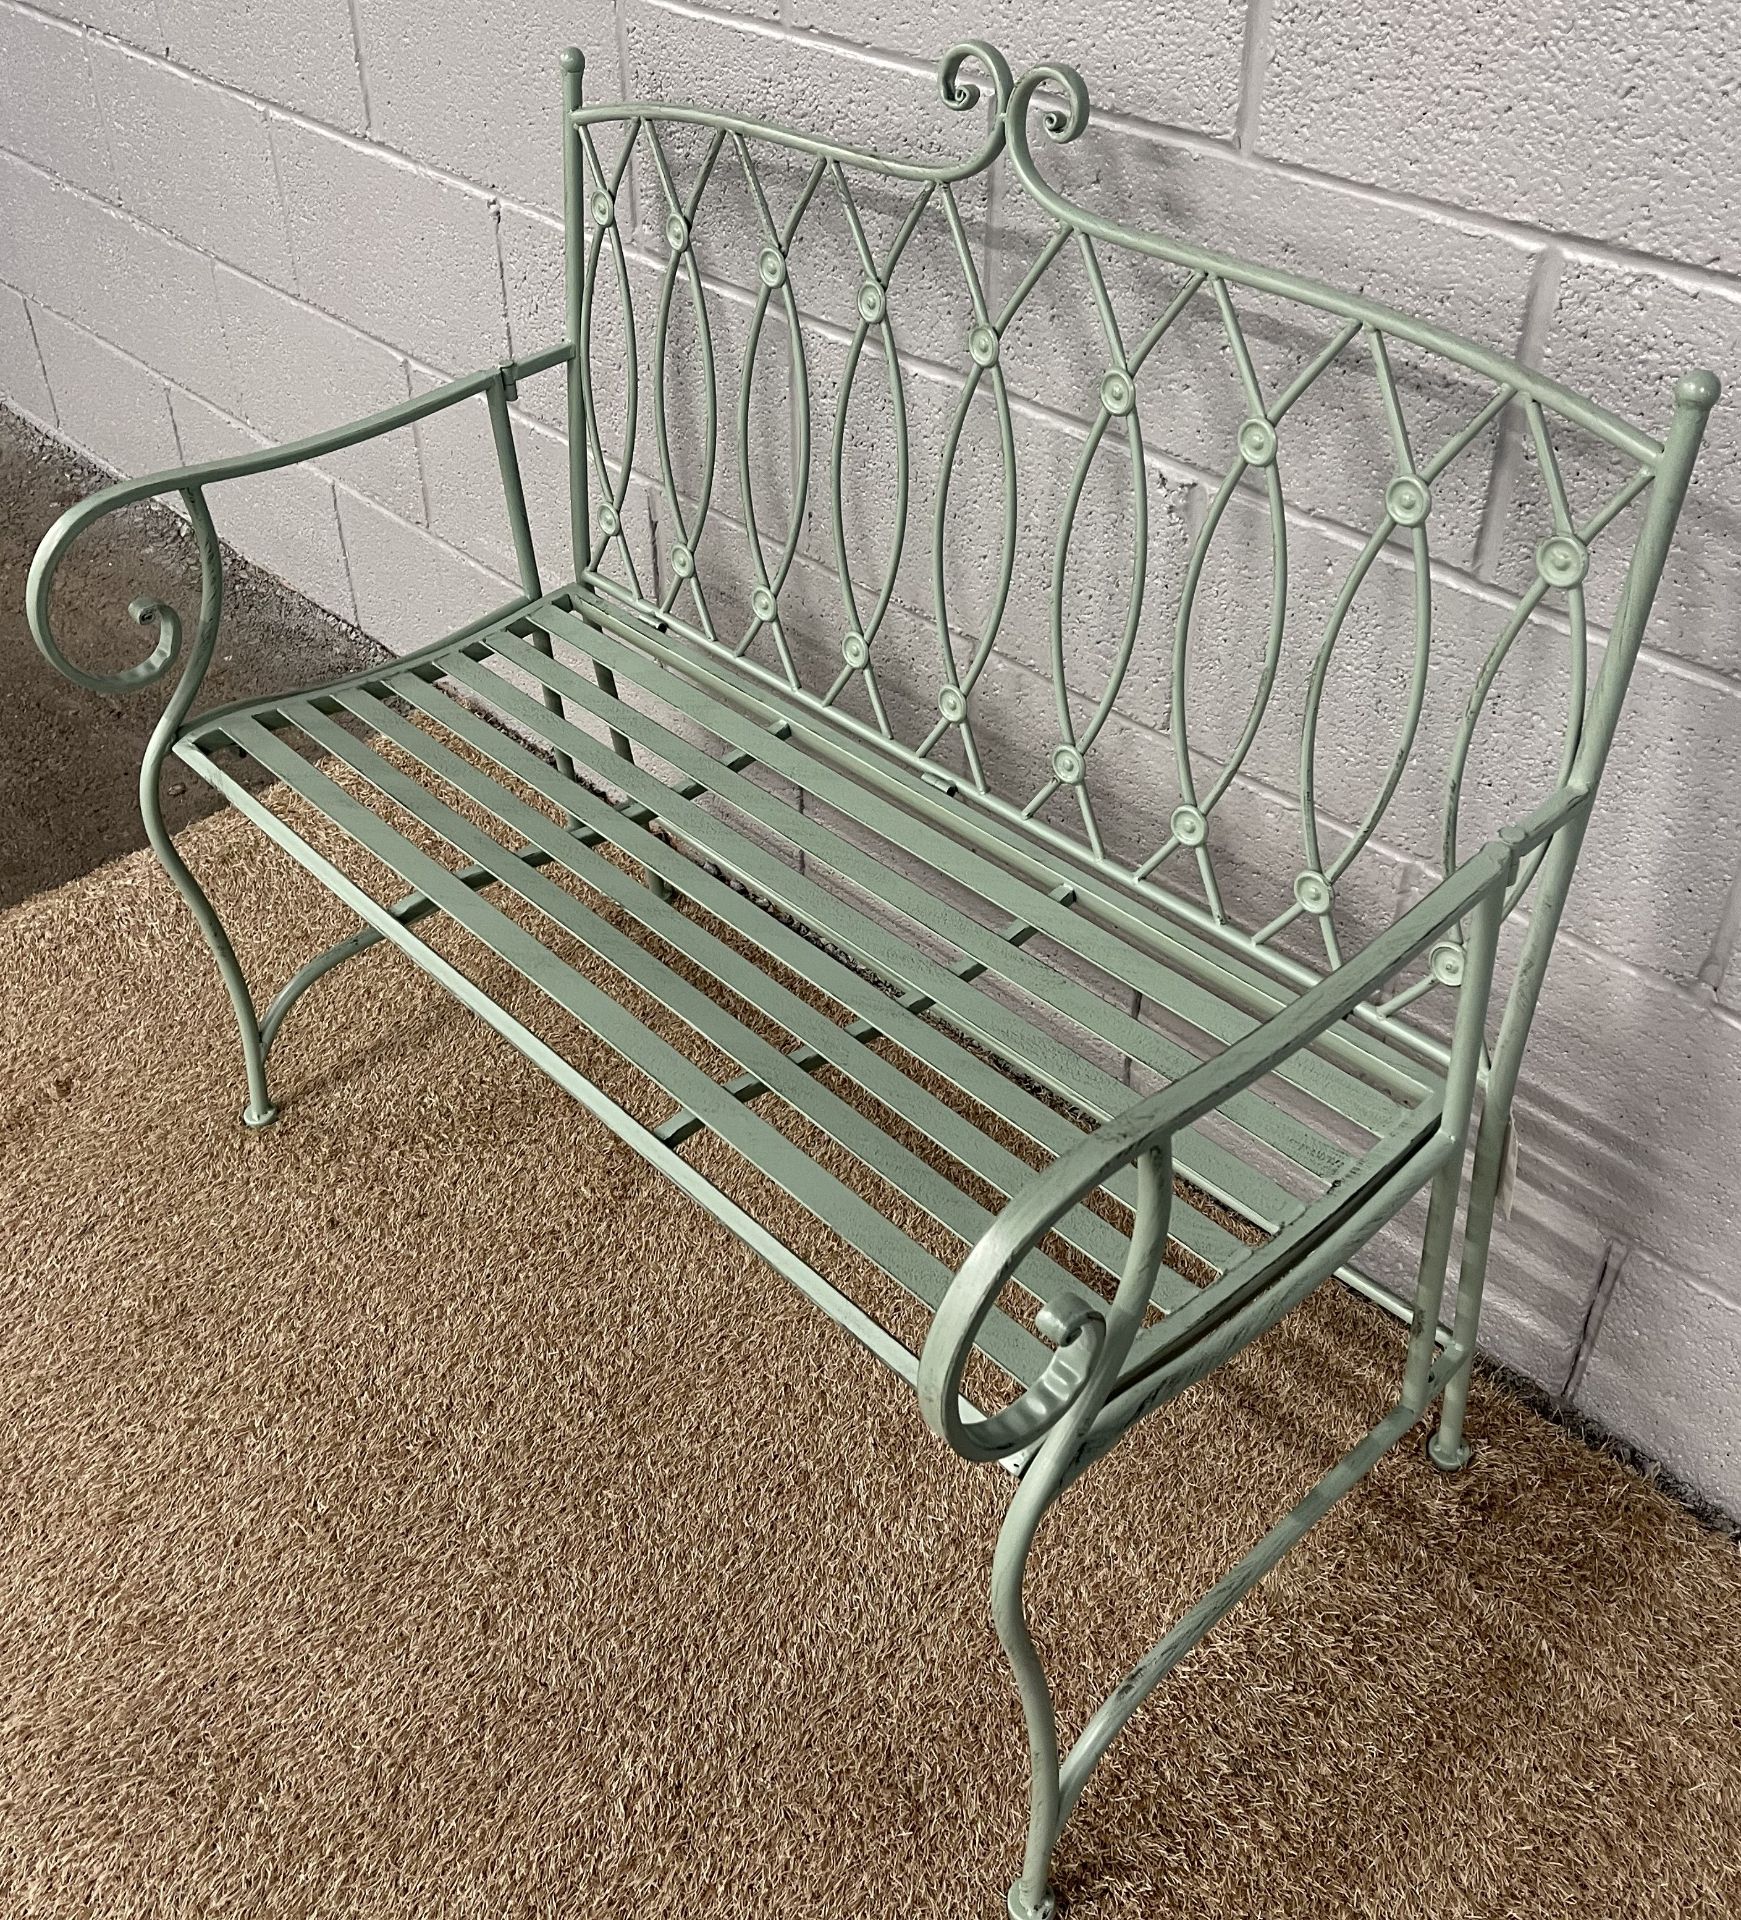 NEW 105CM BLUE METAL BUTTON2 SEATER BENCH - Image 2 of 2